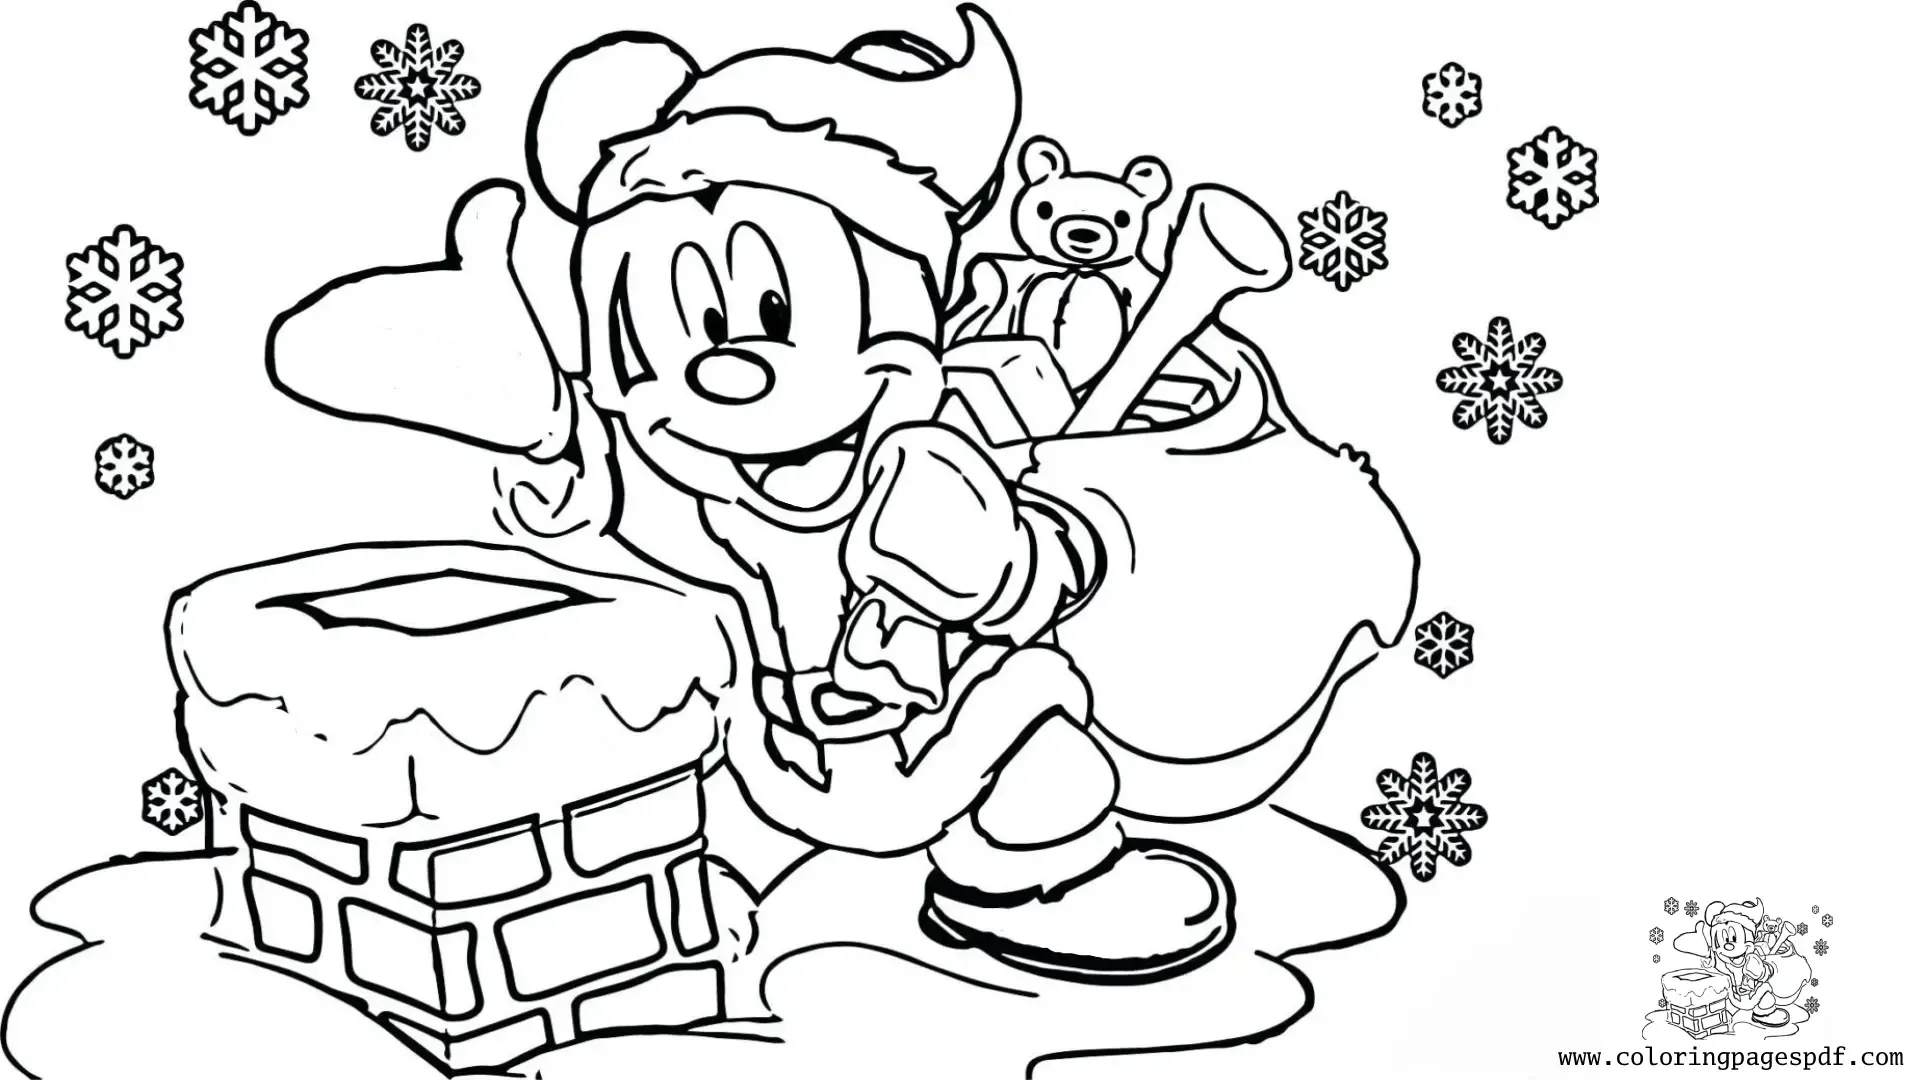 Coloring Page Of Mickey Mouse Giving Presents